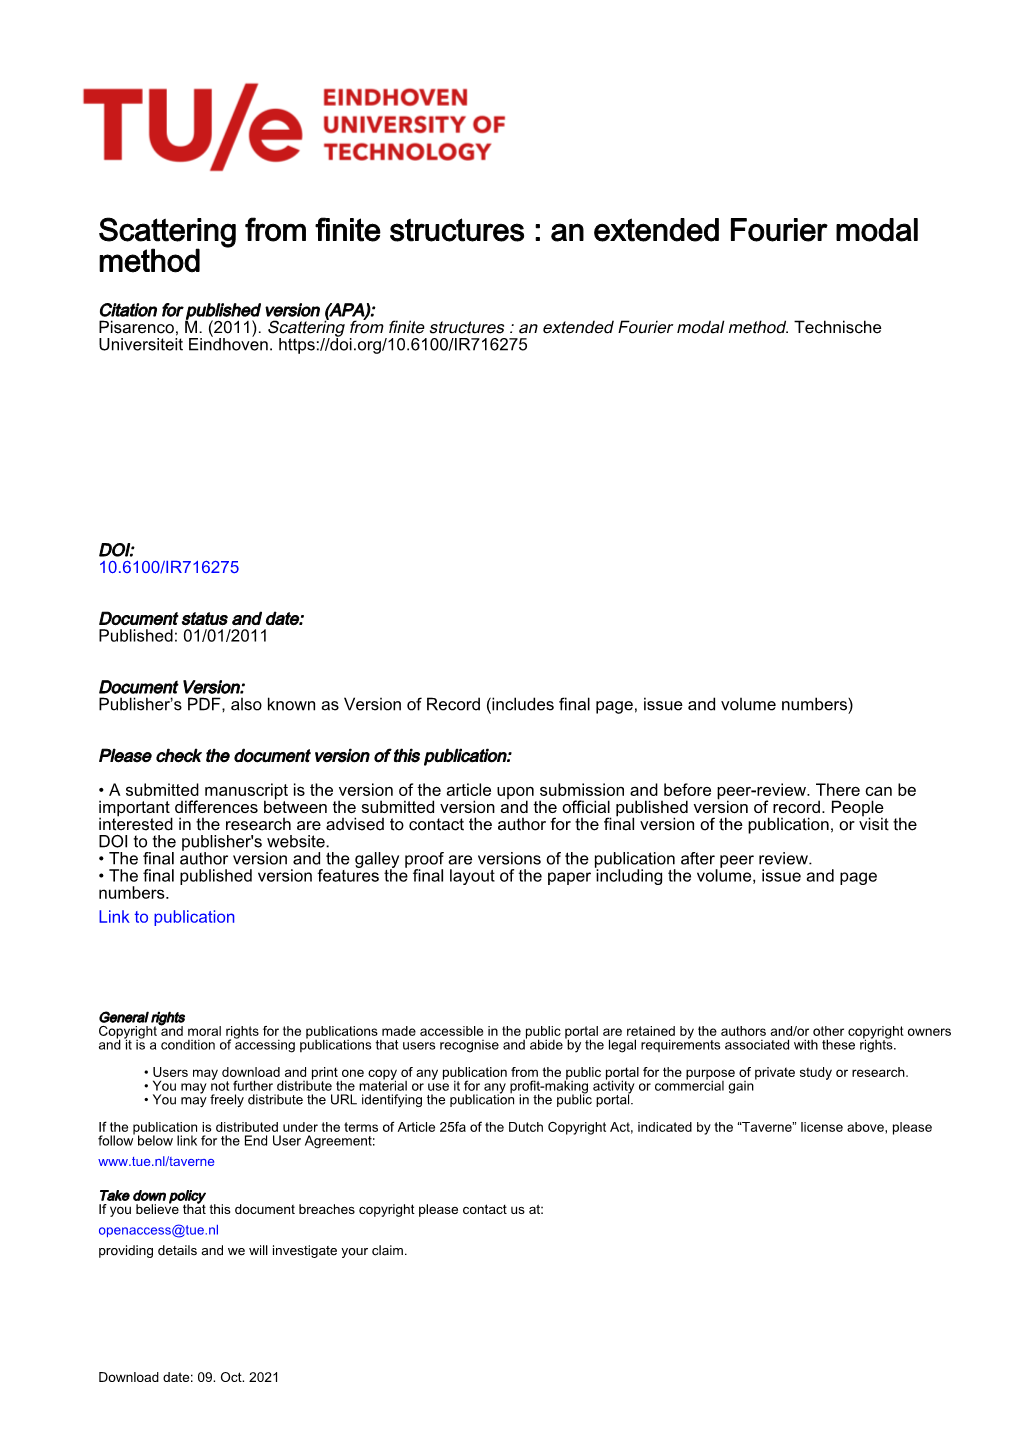 Scattering from Finite Structures : an Extended Fourier Modal Method